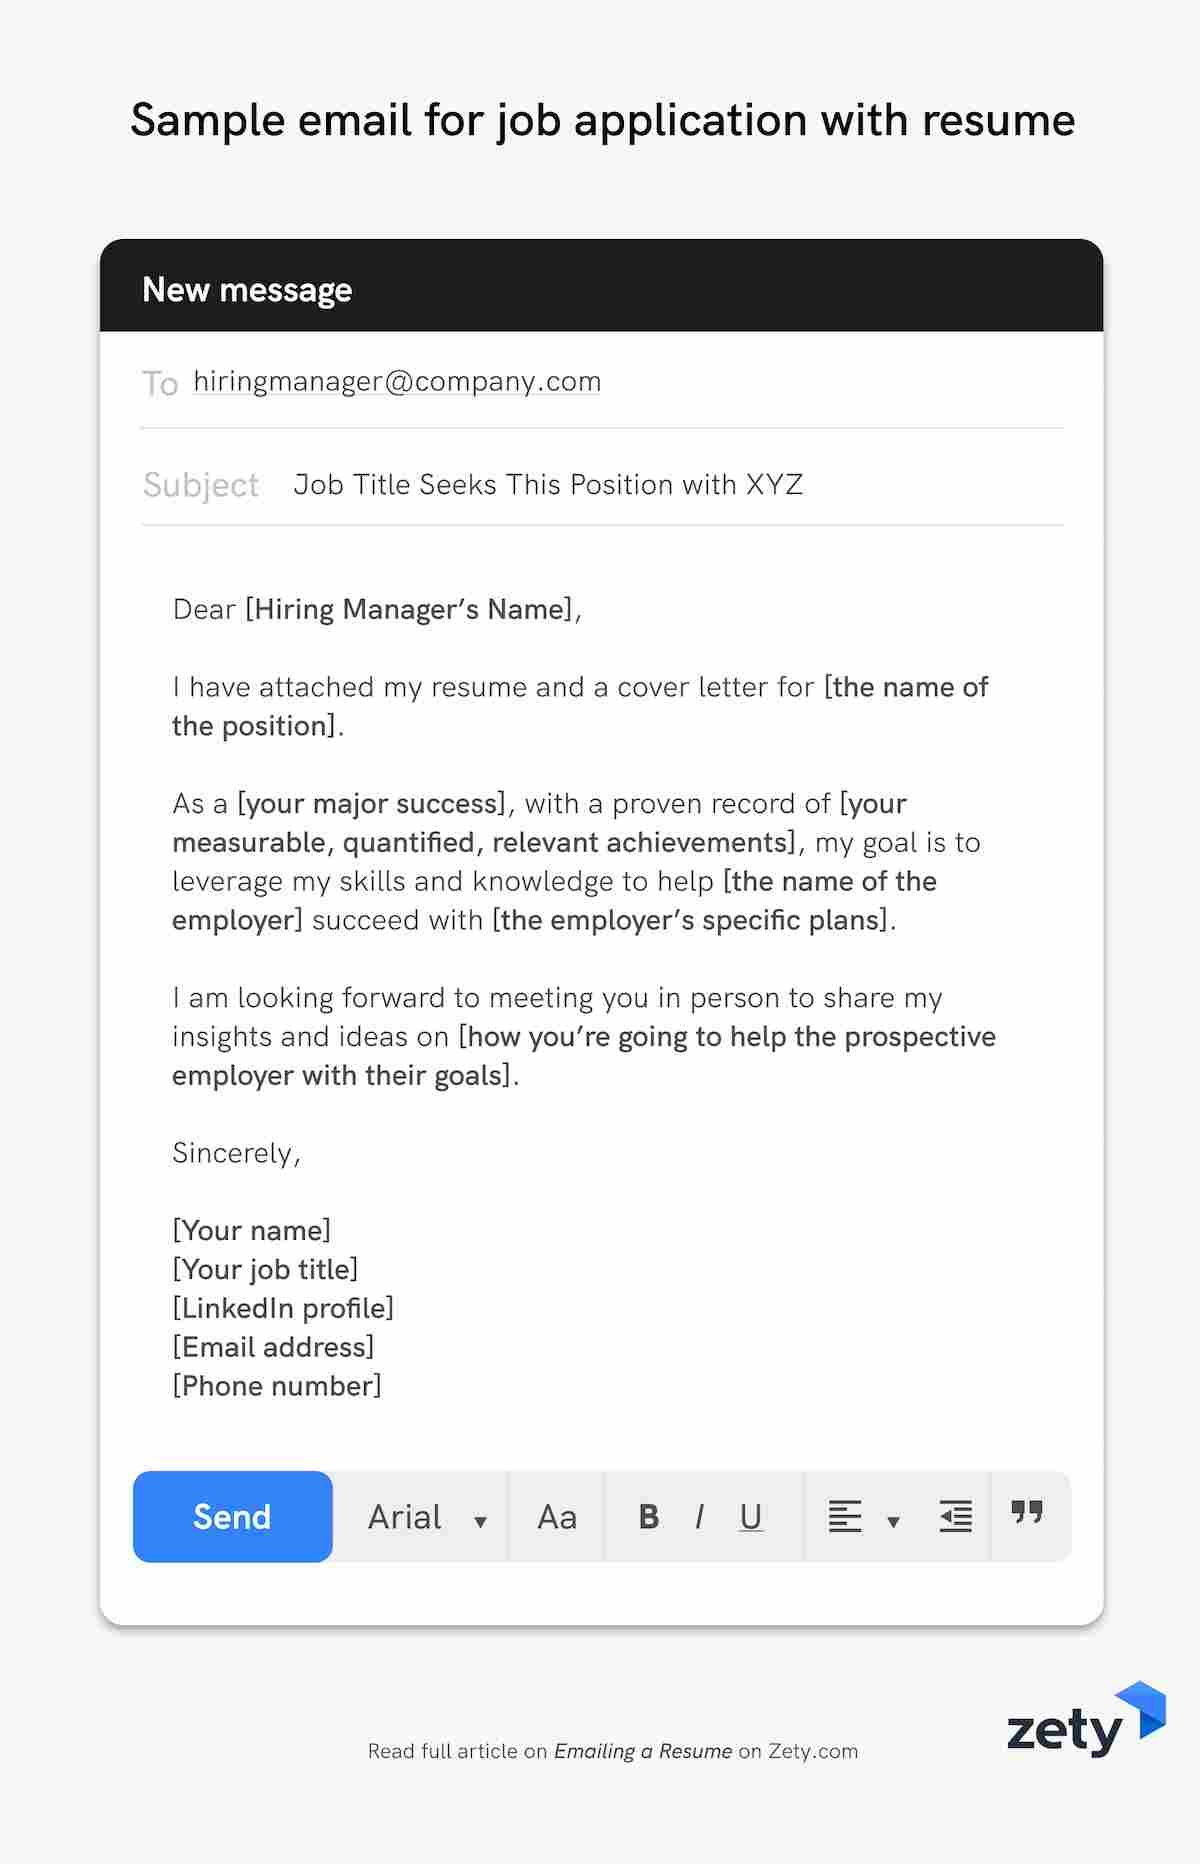 Sample Email Body Text for Sending Resume Emailing A Resume 12 Job Application Email Samples